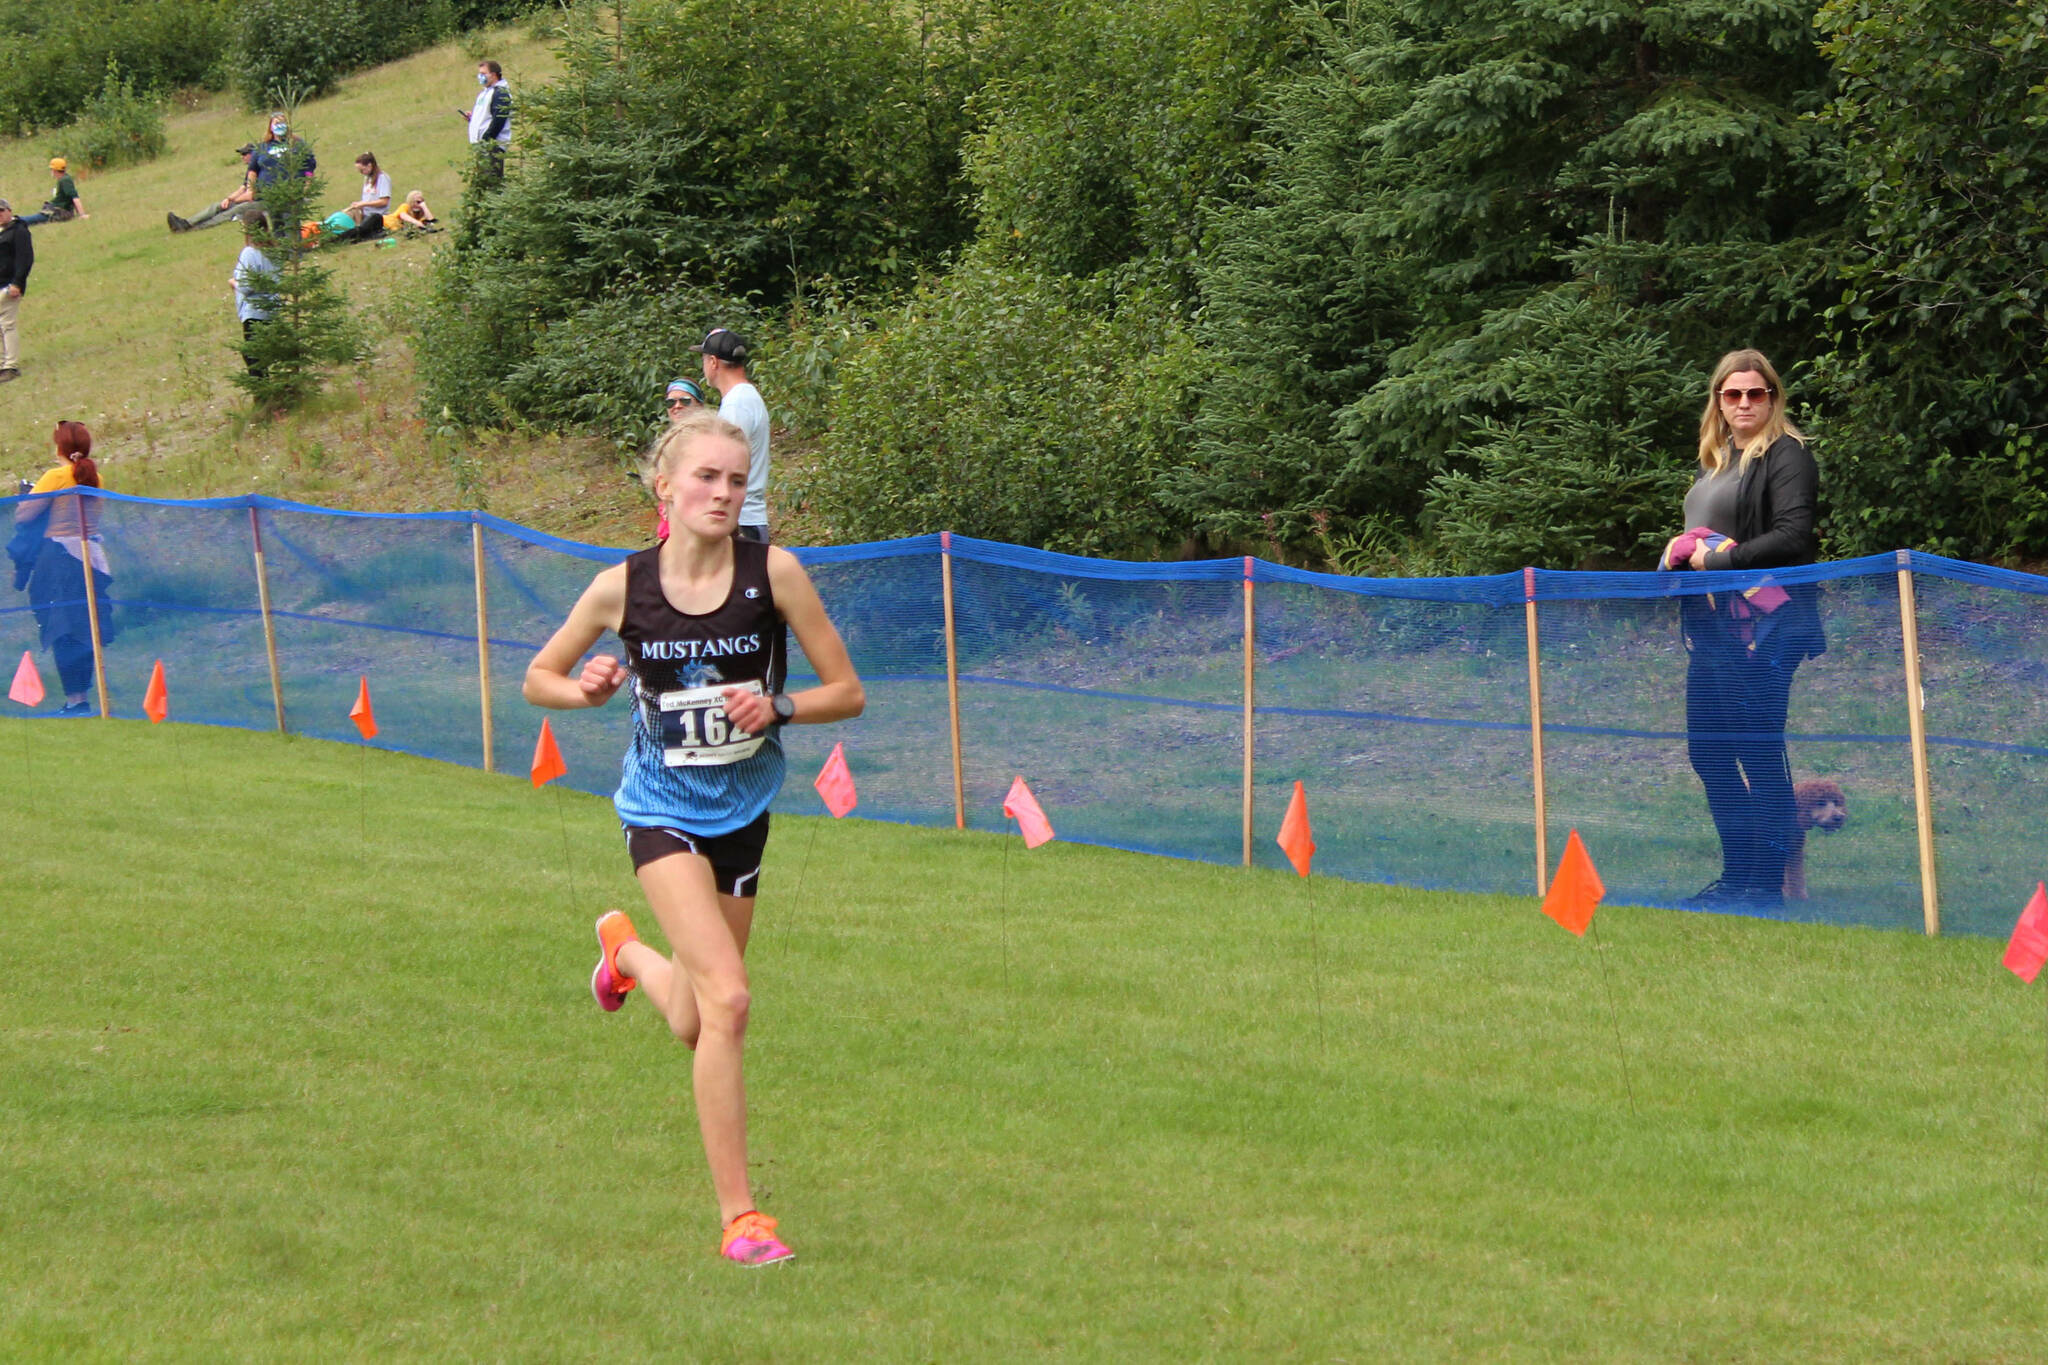 Chugiak High School’s Cameron Peterson races to victory at the 2022 Ted McKenney XC Running Invitational at Tsalteshi Trails at Skyview Middle School on Saturday, Aug. 20, 2022 in Soldotna, Alaska. (Ashlyn O’Hara/Peninsula Clarion)